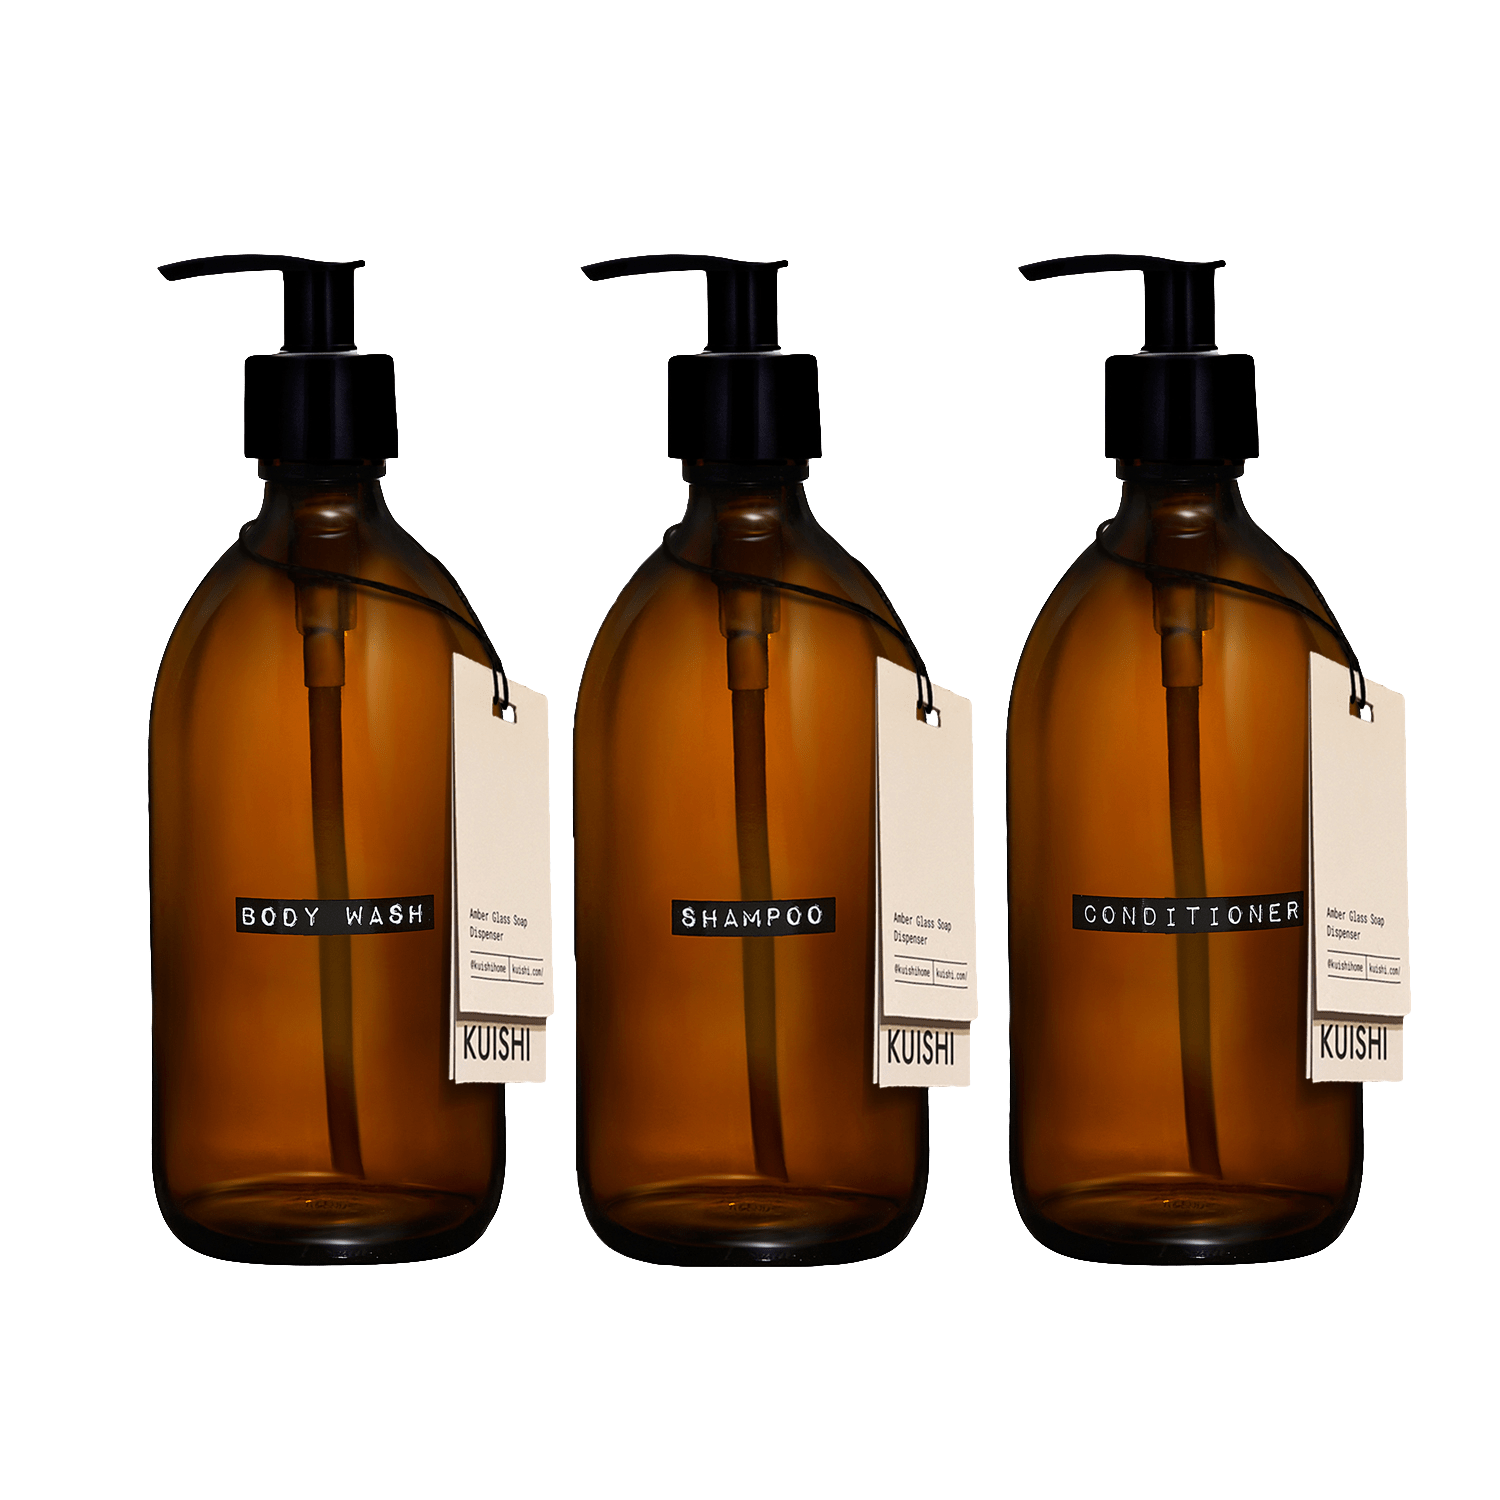 Shampoo Body Wash and Conditioner Bottles